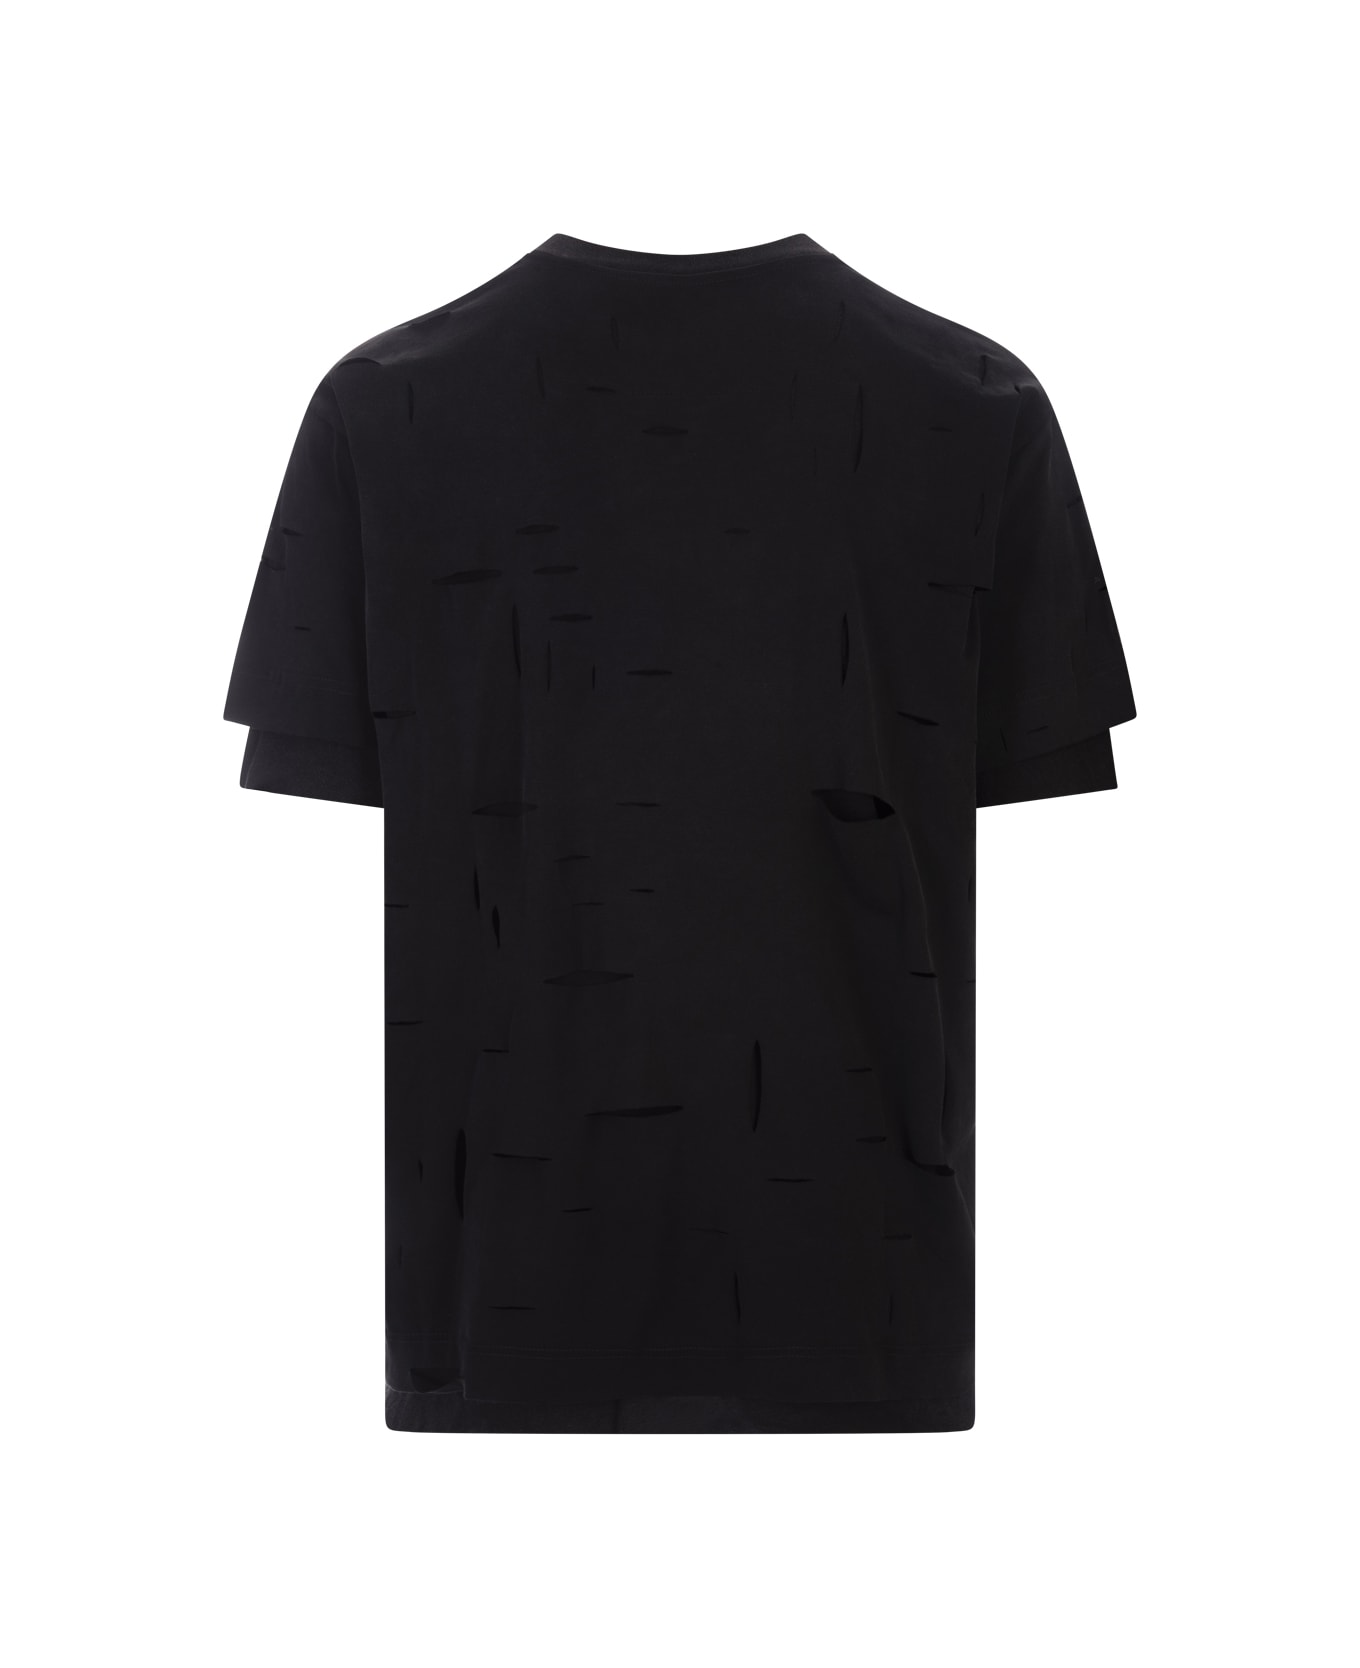 Givenchy Black Destroyed T-shirt With Logo - Black シャツ